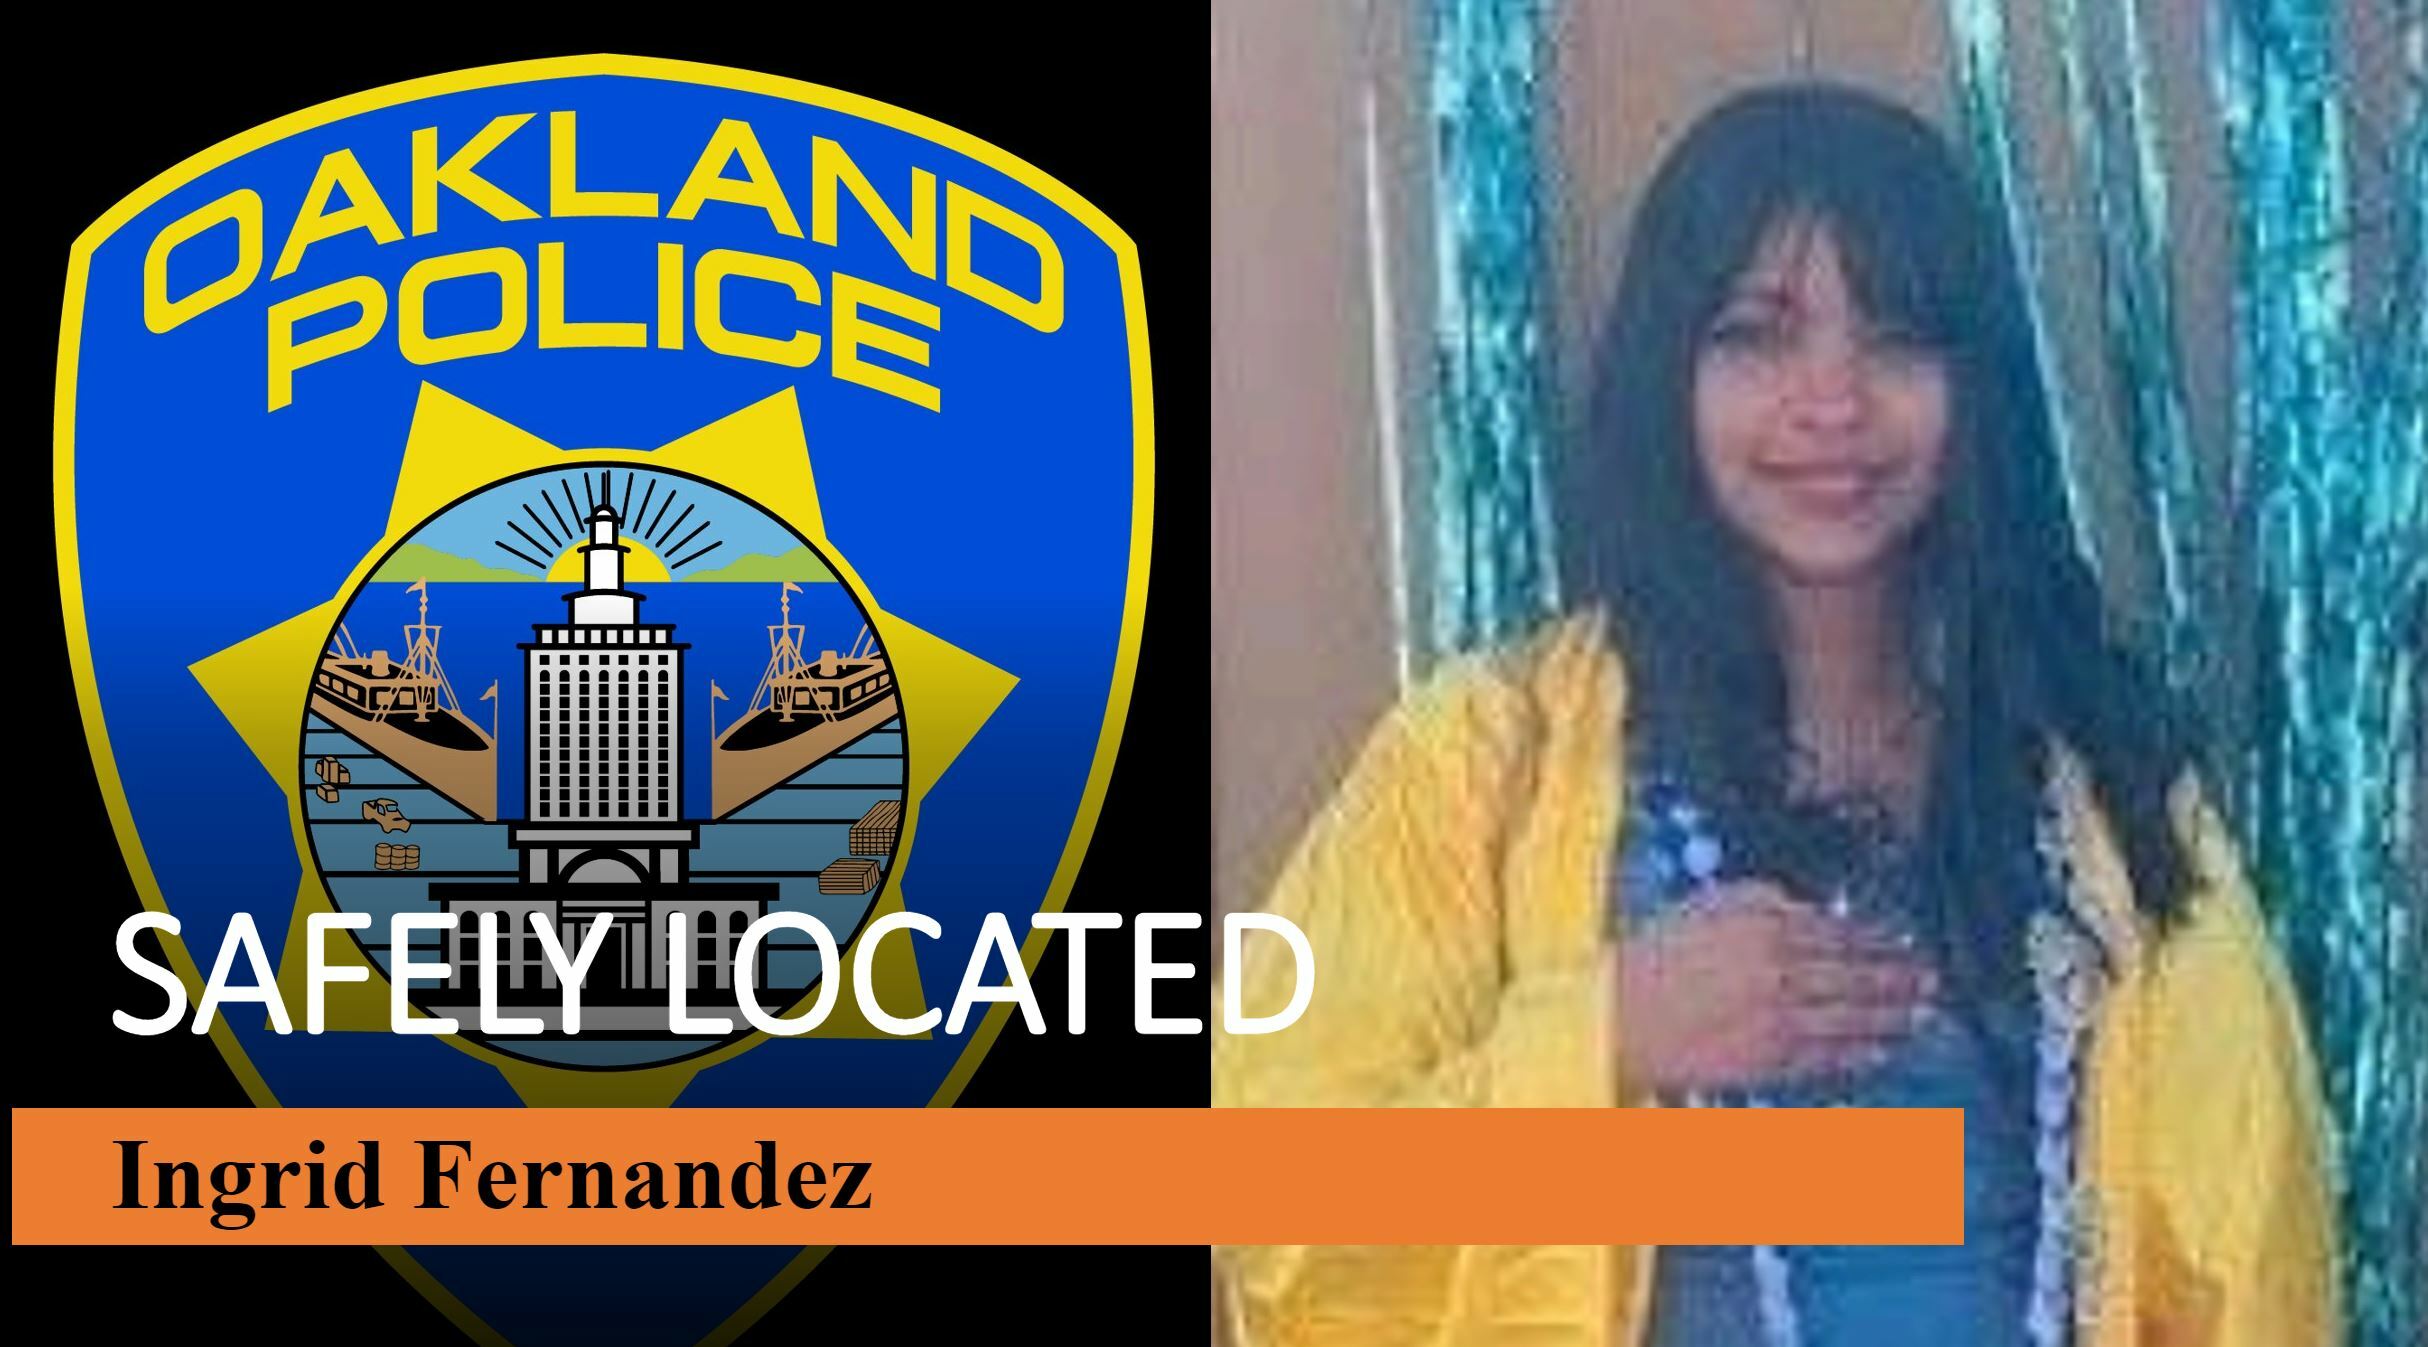 Photo of Ingrid Fernandez who has been safely located